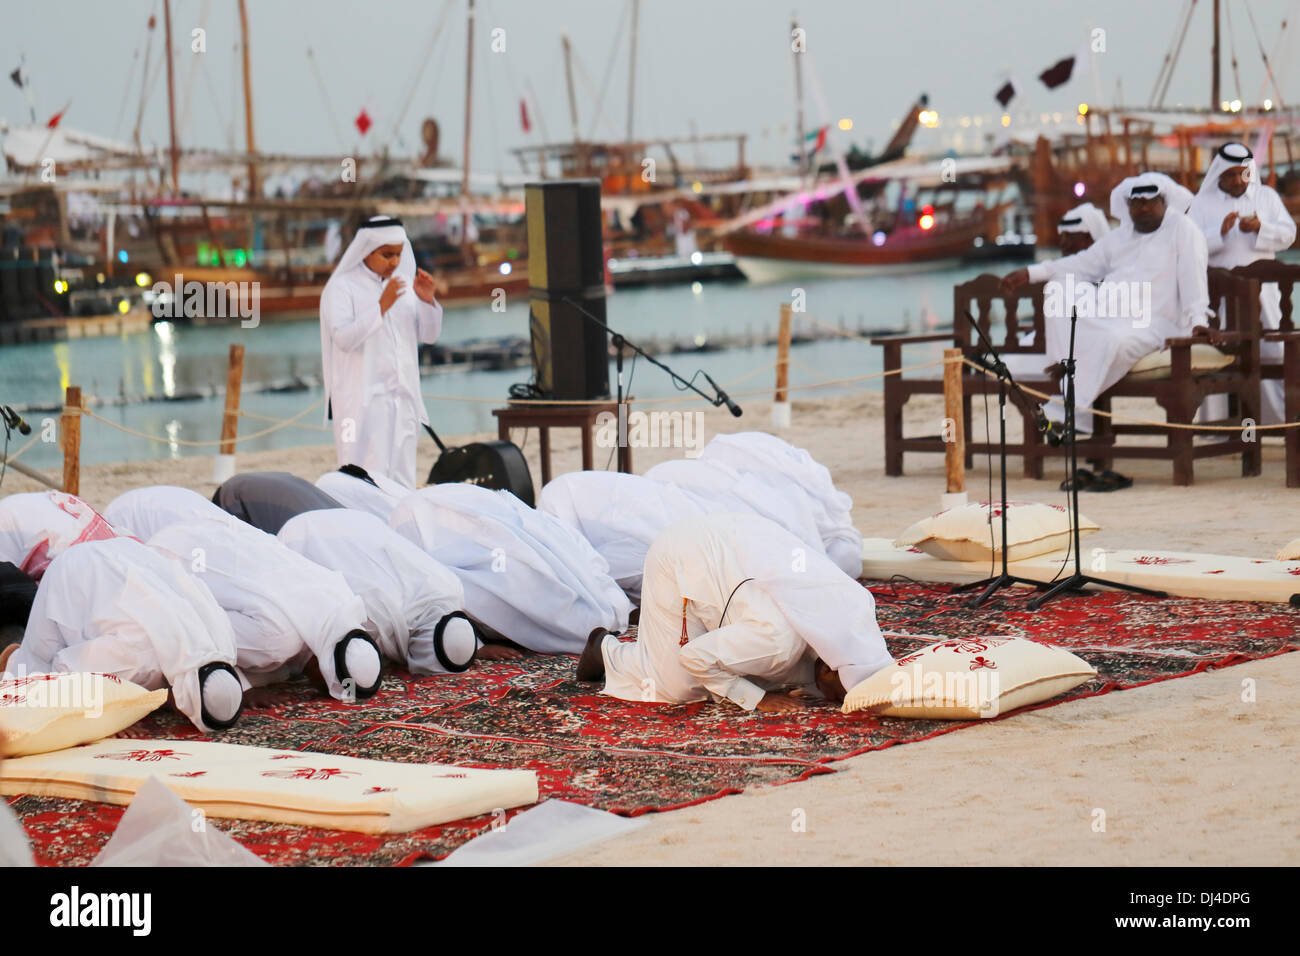 DOHA, Qatar - Nov 21 2013:  Members of a Qatari traditional music group perform evening prayers at the 3rd Traditional Dhow Festival, held at Katara cultural village in the West Bay area of the Qatari capital. Credit:  Art of Travel/Alamy Live News Stock Photo